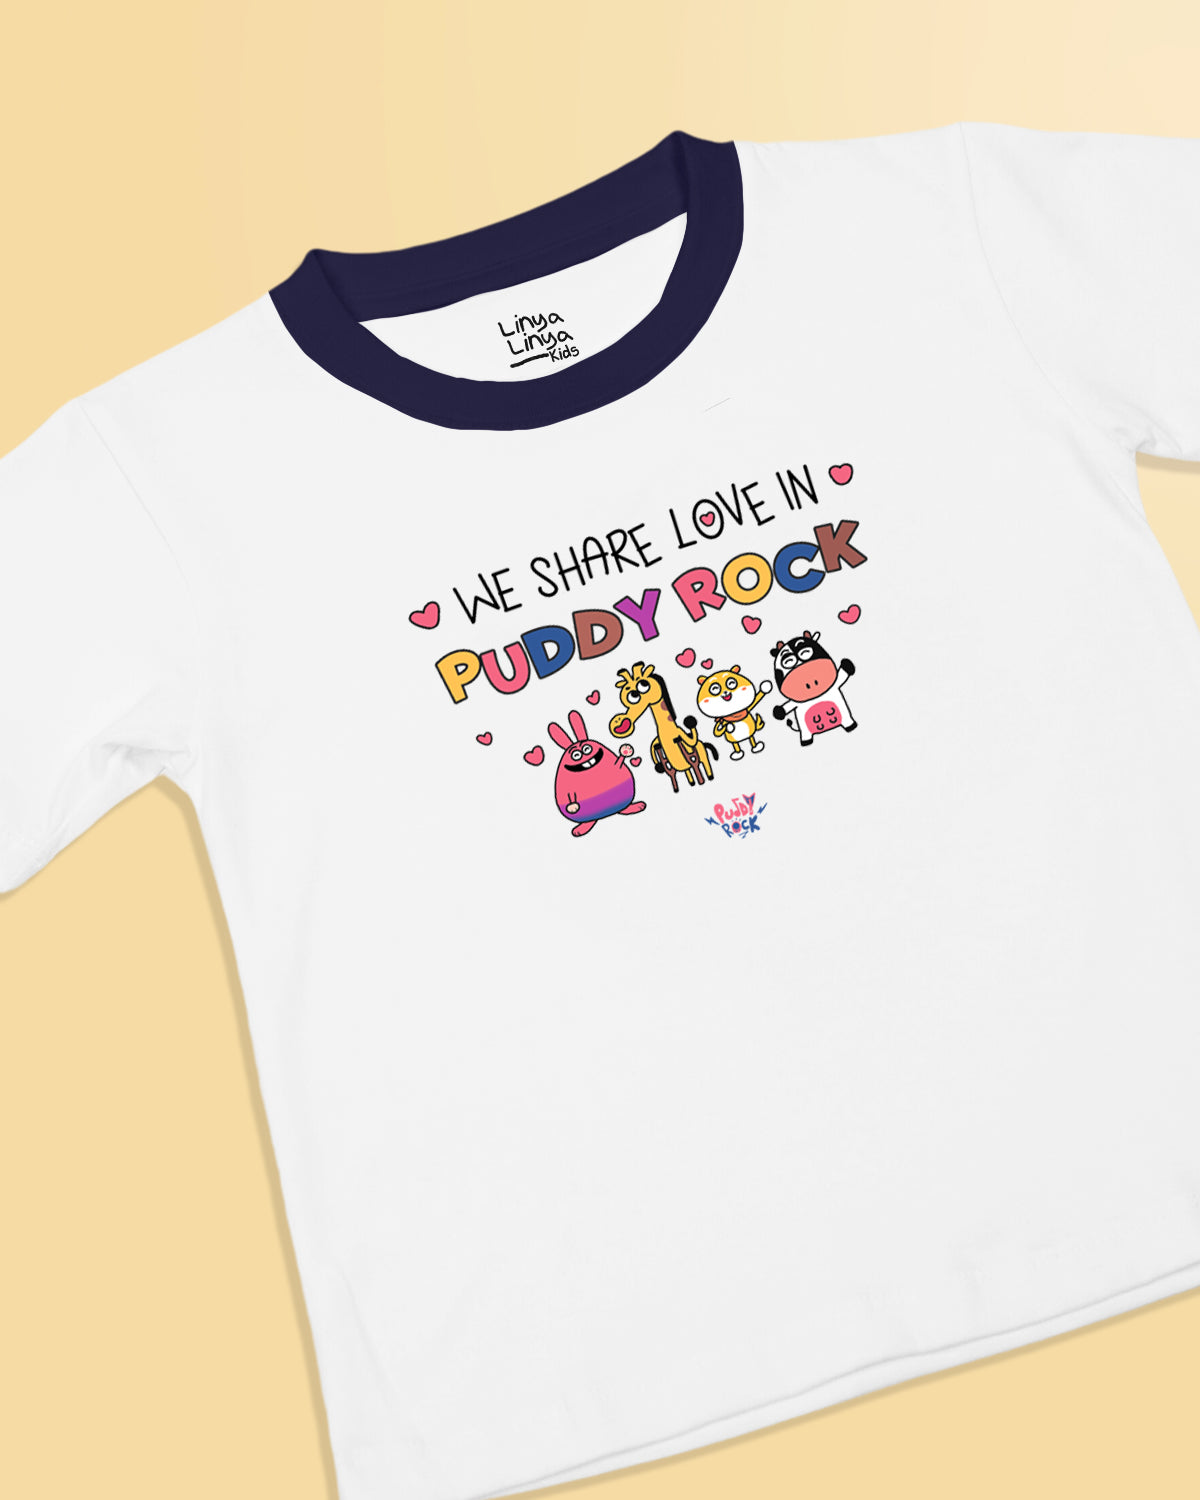 Puddy Rock Kids T-Shirt: We Share Love In Puddy Rock (Ringer Tee, White)